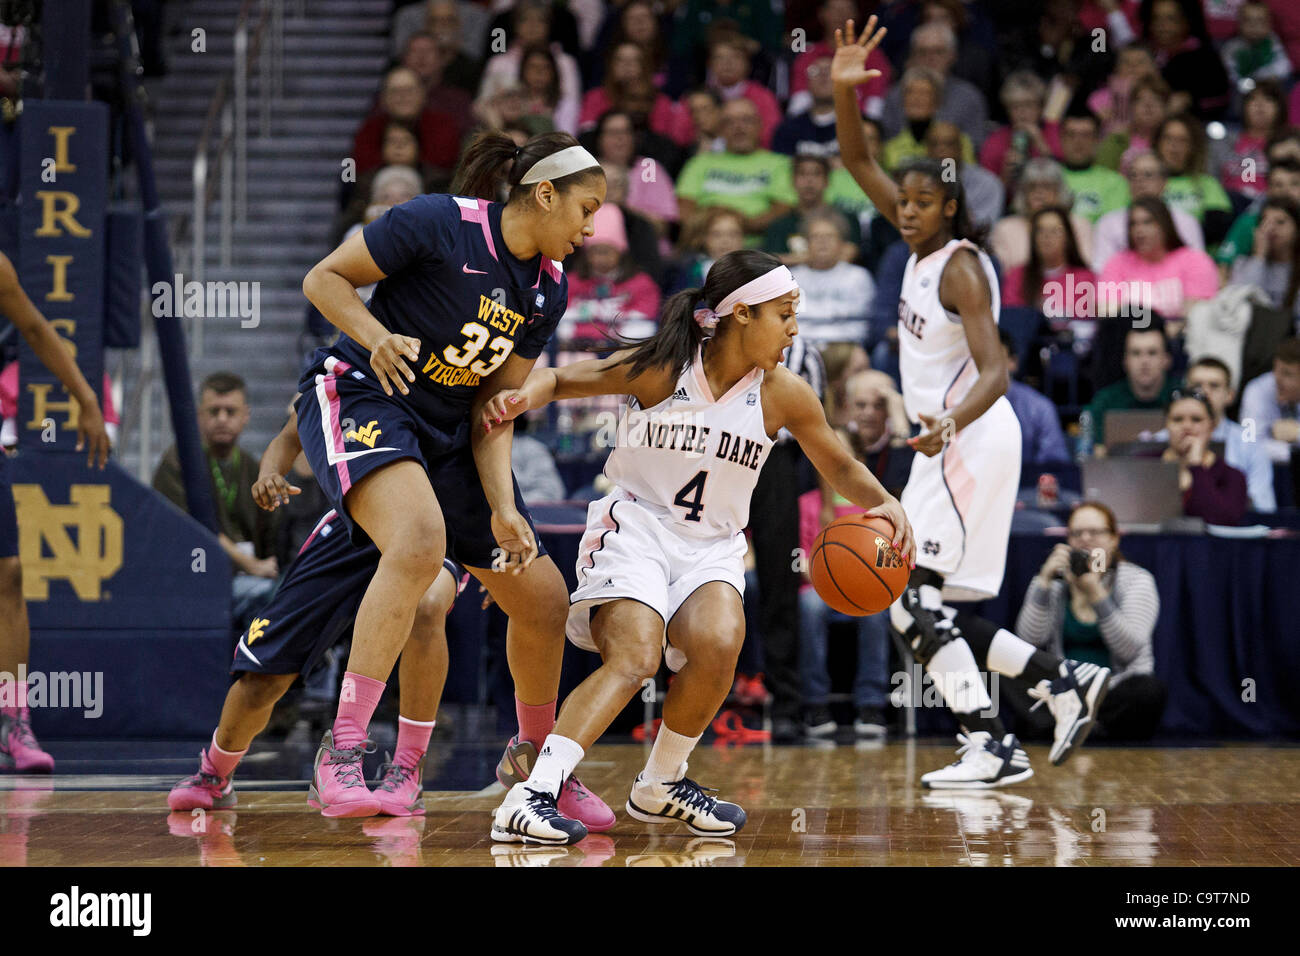 Feb. 12, 2012 - South Bend, Indiana, U.S - Notre Dame guard Skylar Diggins (#4) dribbles the ball as West Virginia center Ayana Dunning (#33) defends in first half action of NCAA Women's basketball game between West Virginia and Notre Dame.  The West Virginia Mountaineers upset the Notre Dame Fighti Stock Photo